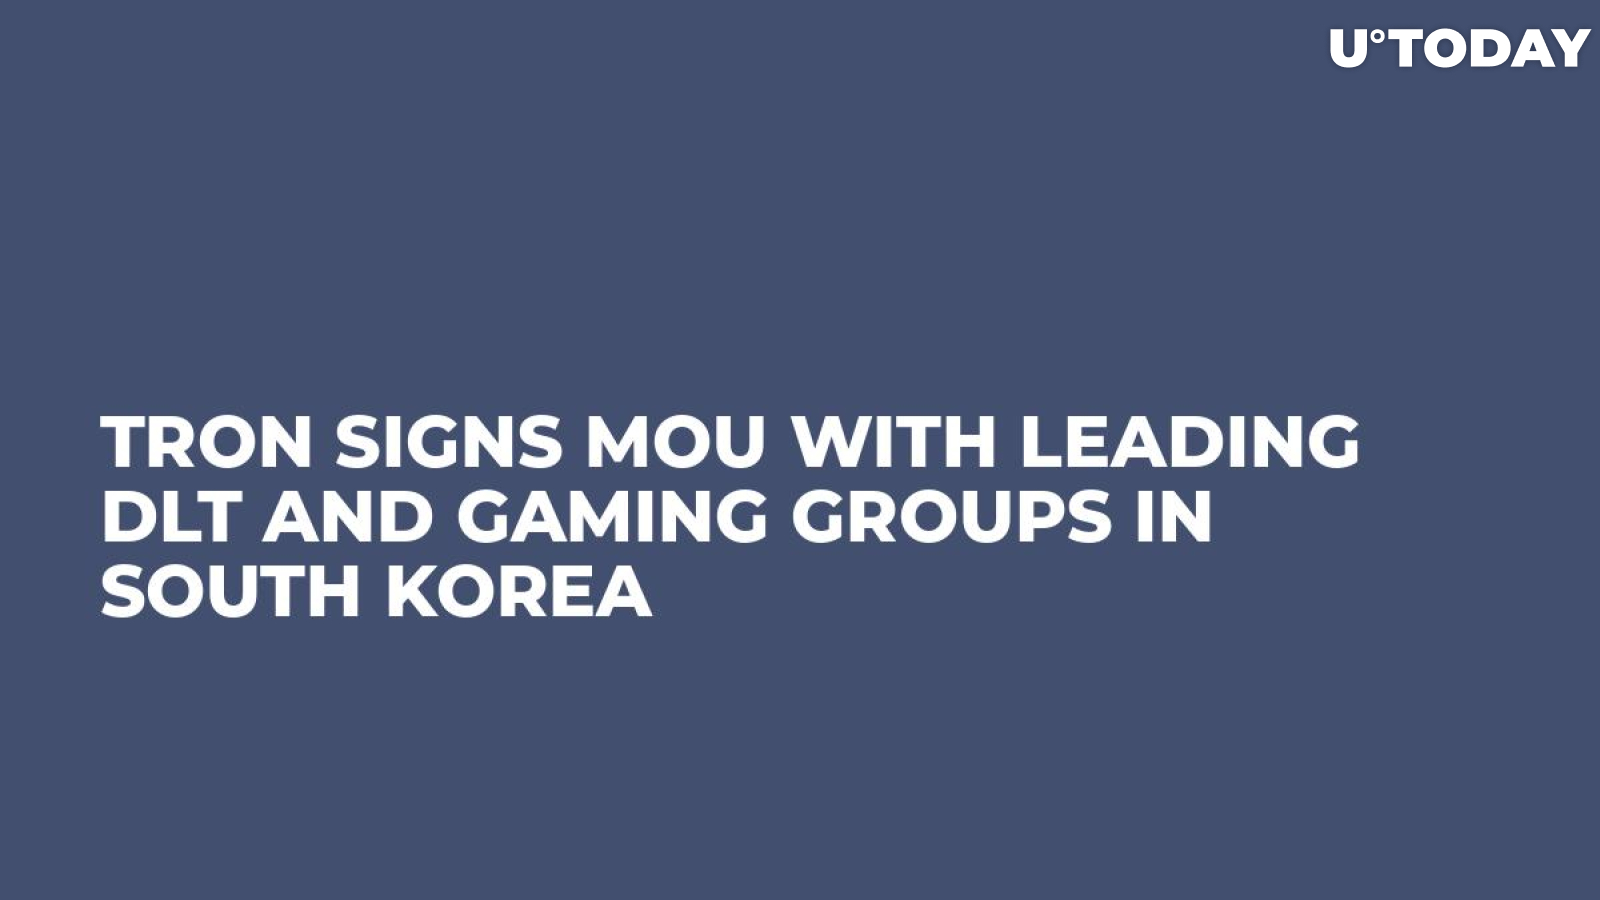 Tron Signs MoU with Leading DLT and Gaming Groups in South Korea